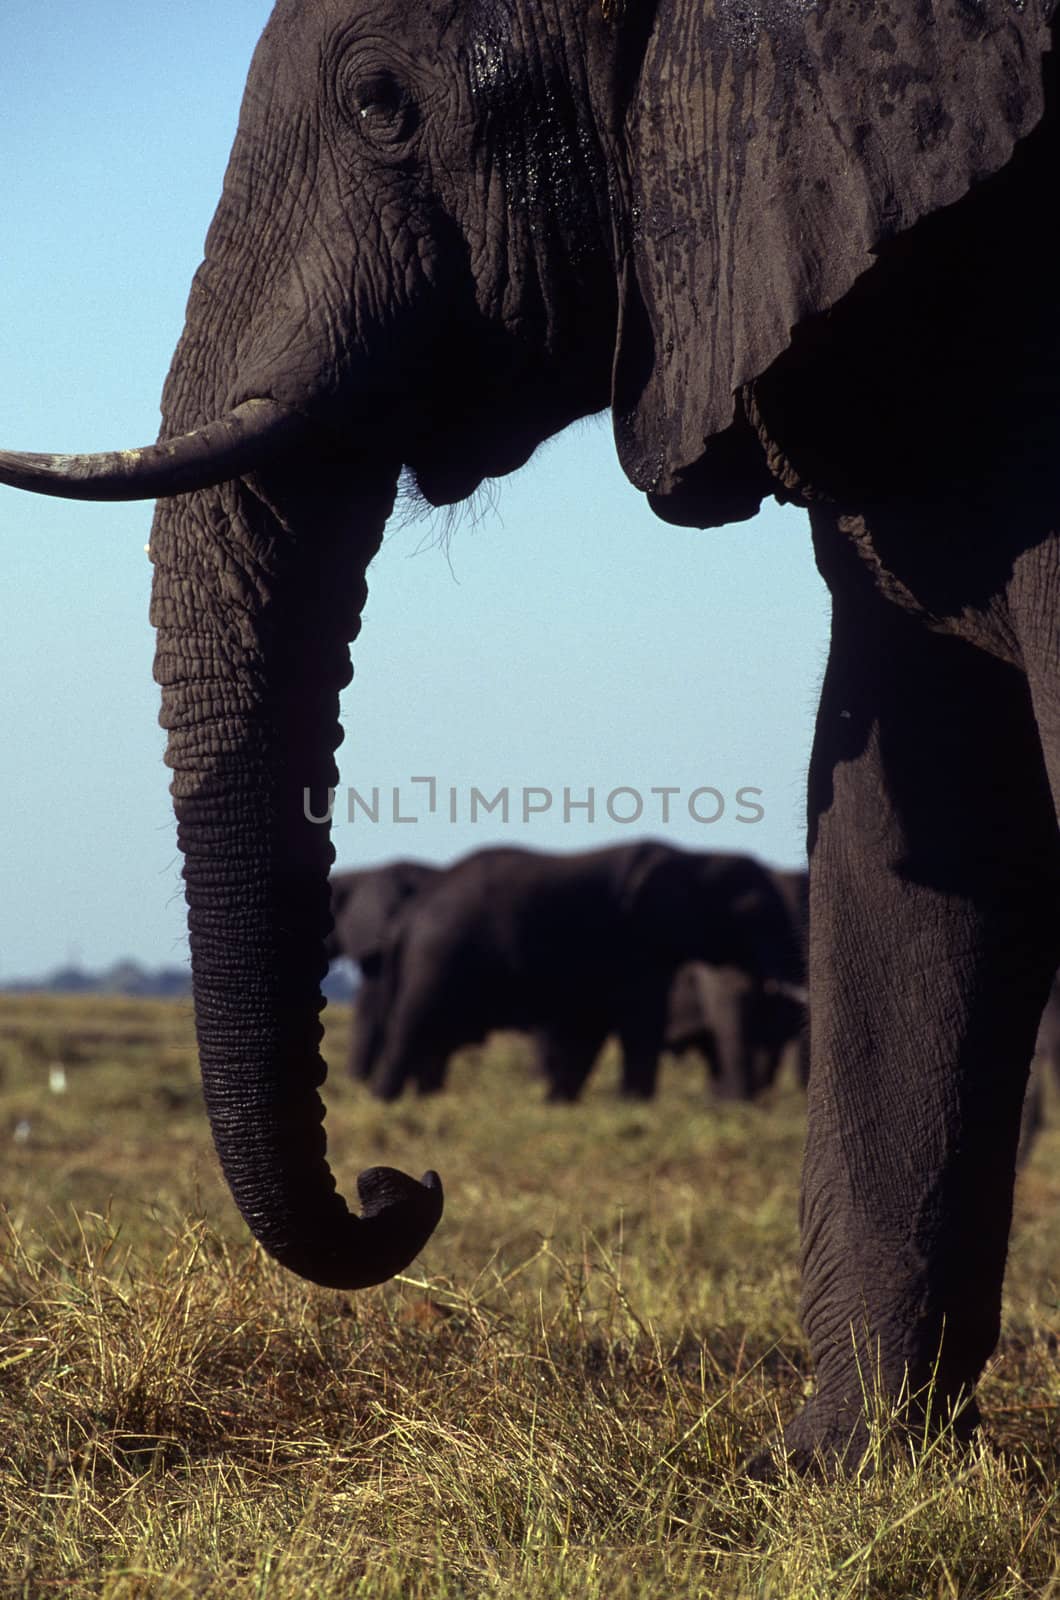 Elephants in the foreground and background viewed between trunk.